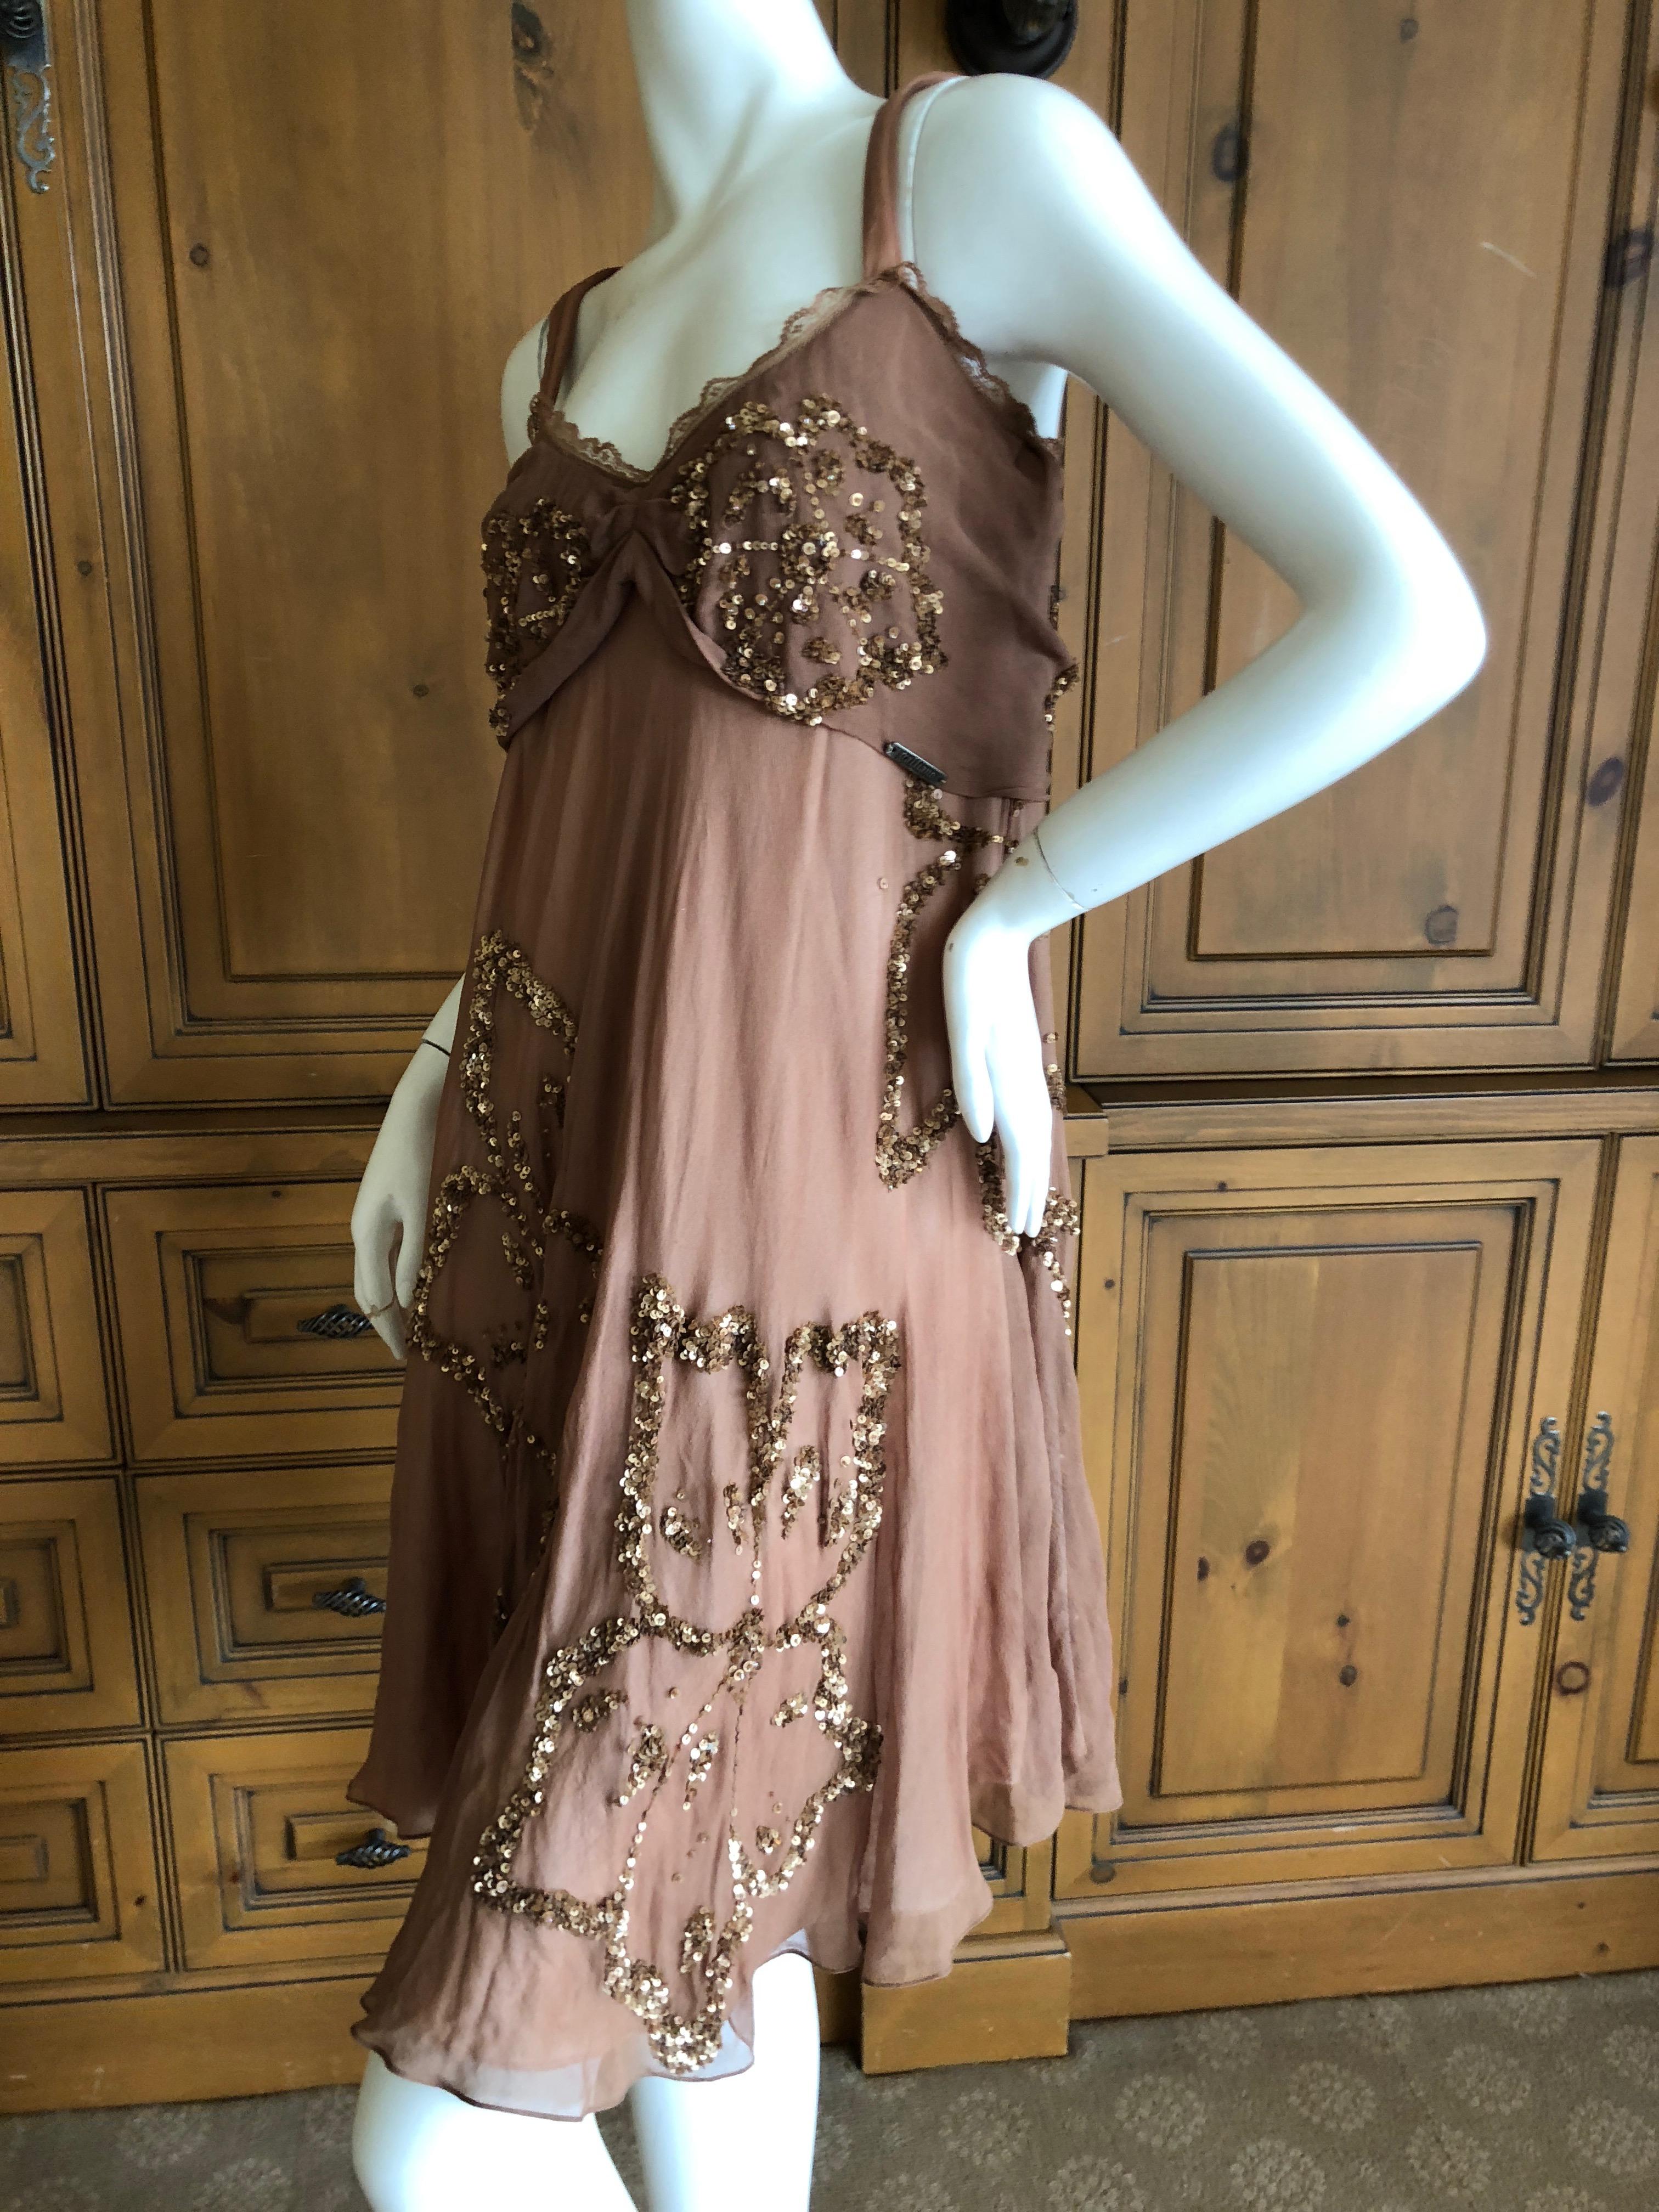 John Galliano SS 2007 Sequin Flower Embellished Mini Cocktail Dress Size 42 In Excellent Condition For Sale In Cloverdale, CA